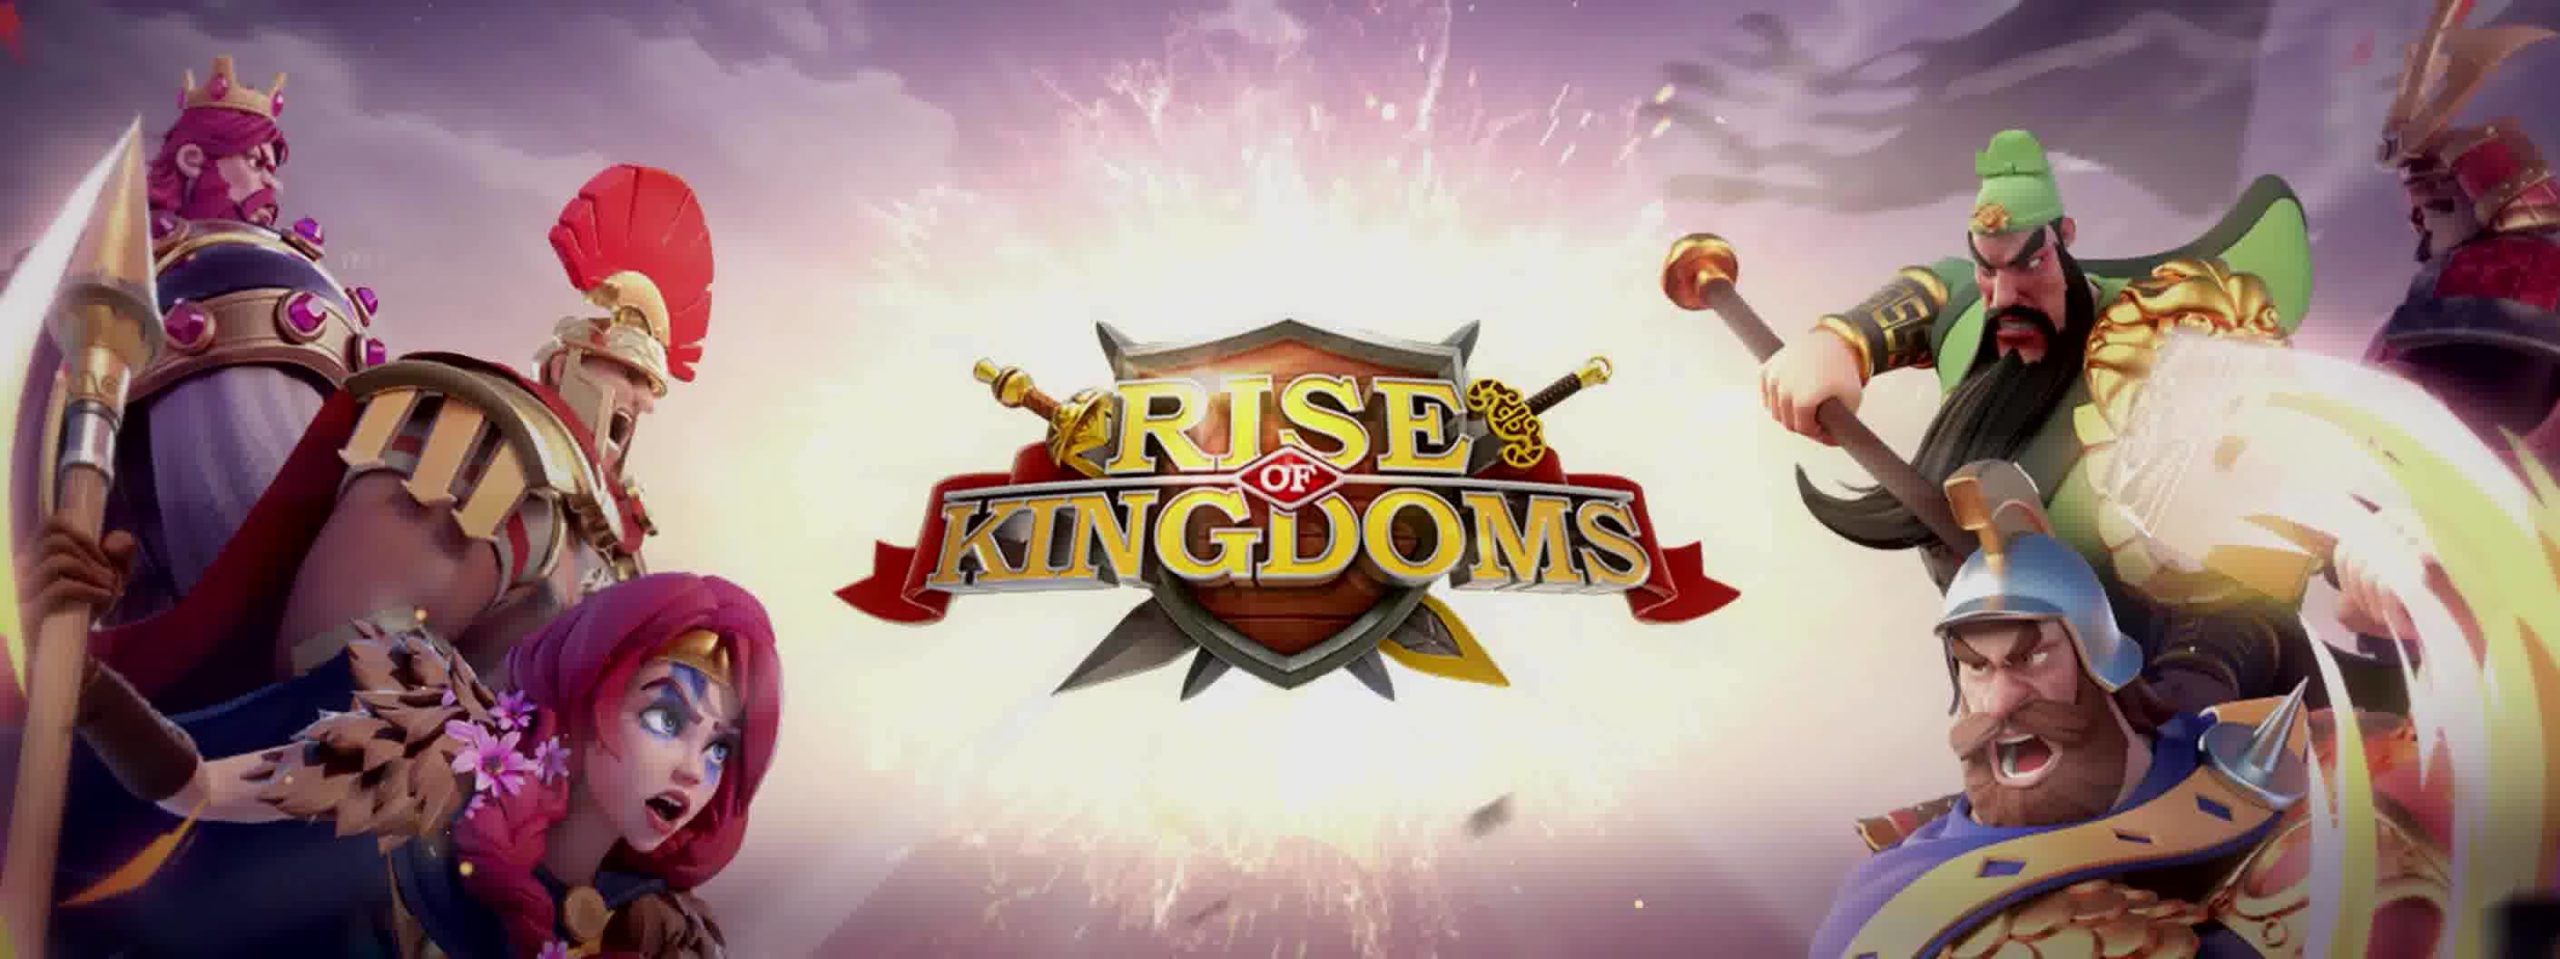 rise of kingdoms featured image